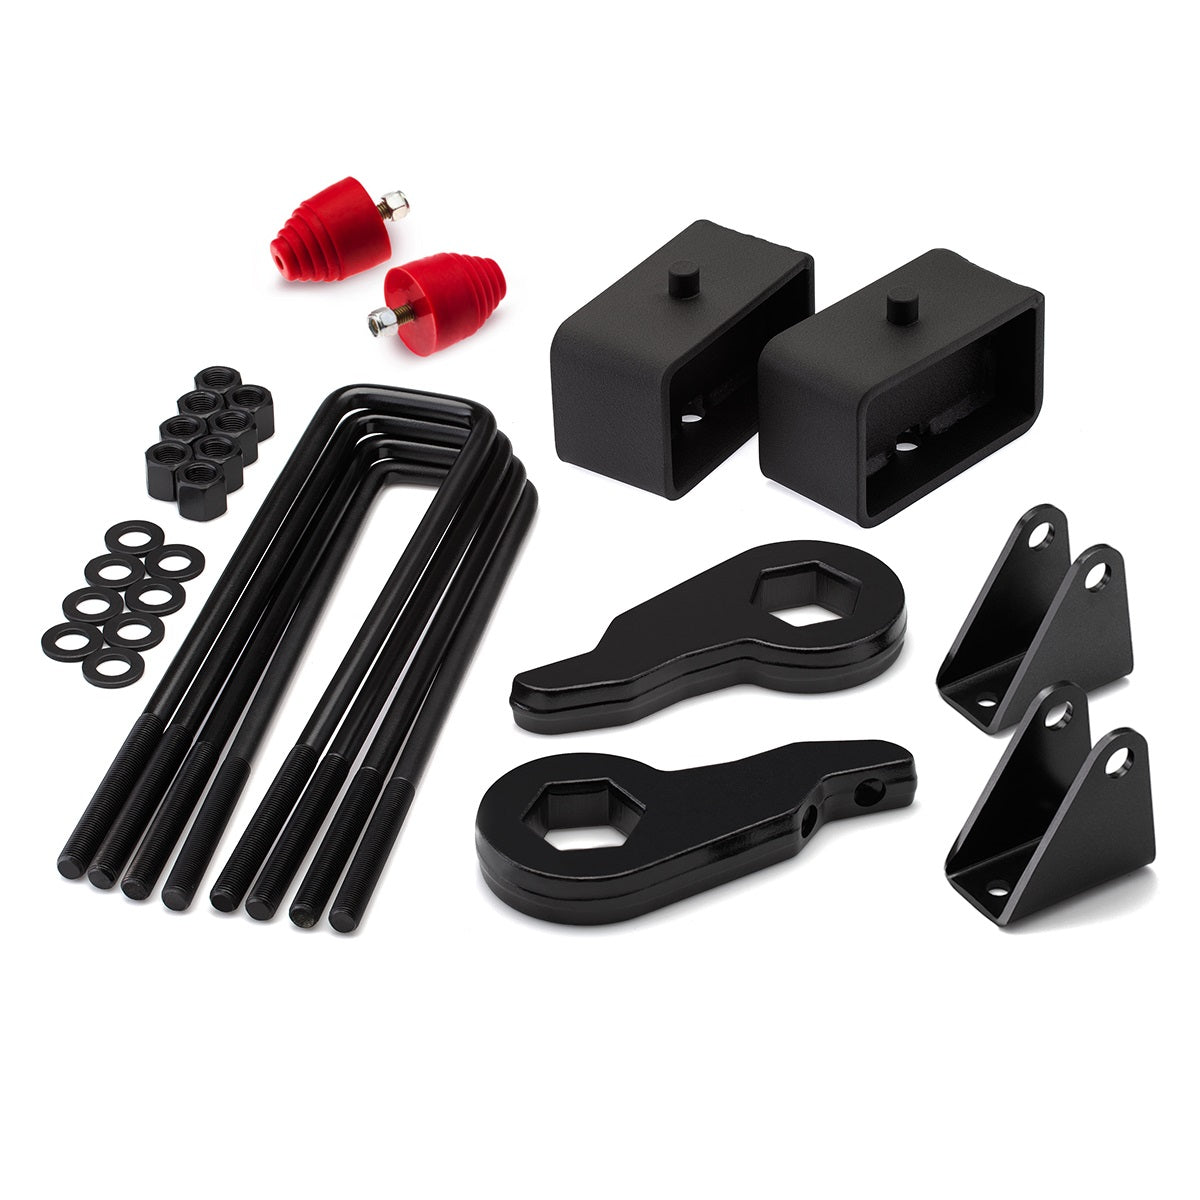 2000-2010 Chevy Silverado 2500HD Full Lift Kit with Bump Stops and Shock Extender Brackets